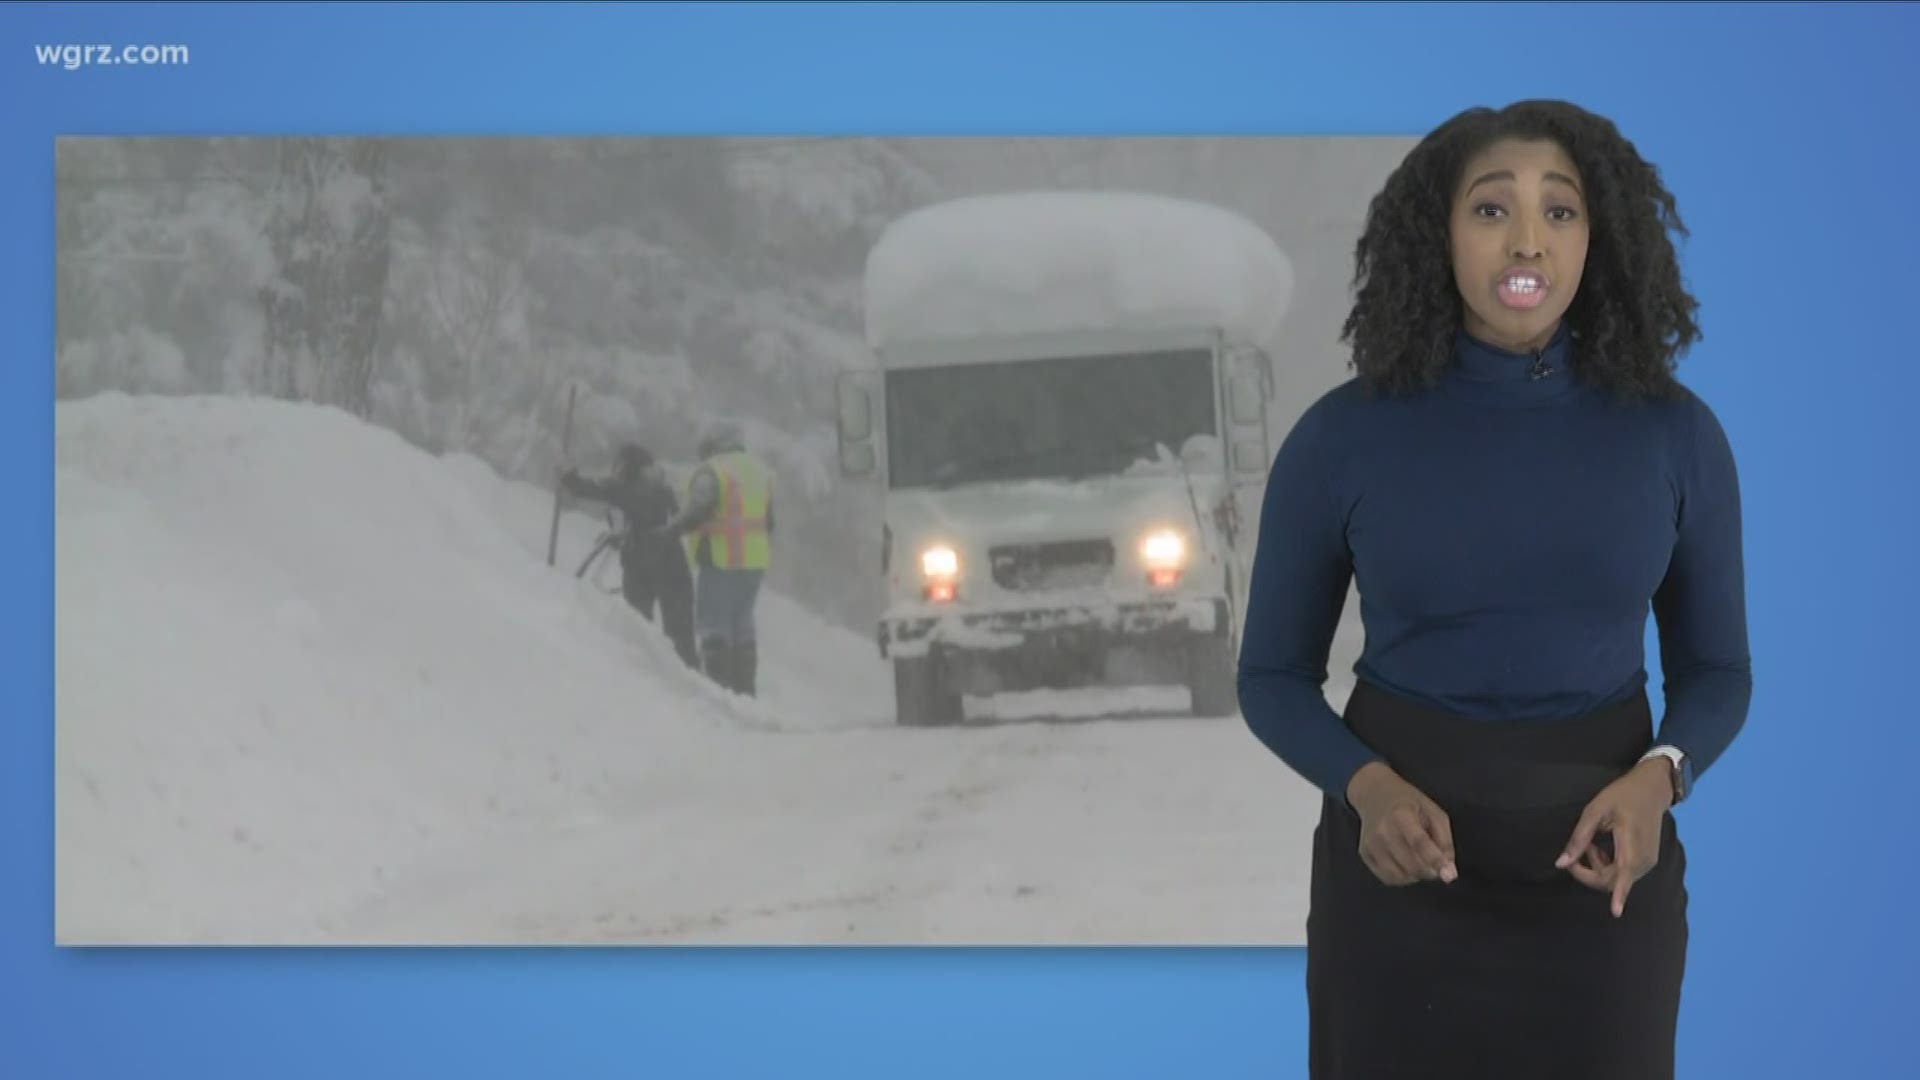 "Plowz" offers snow removal for Western New Yorkers